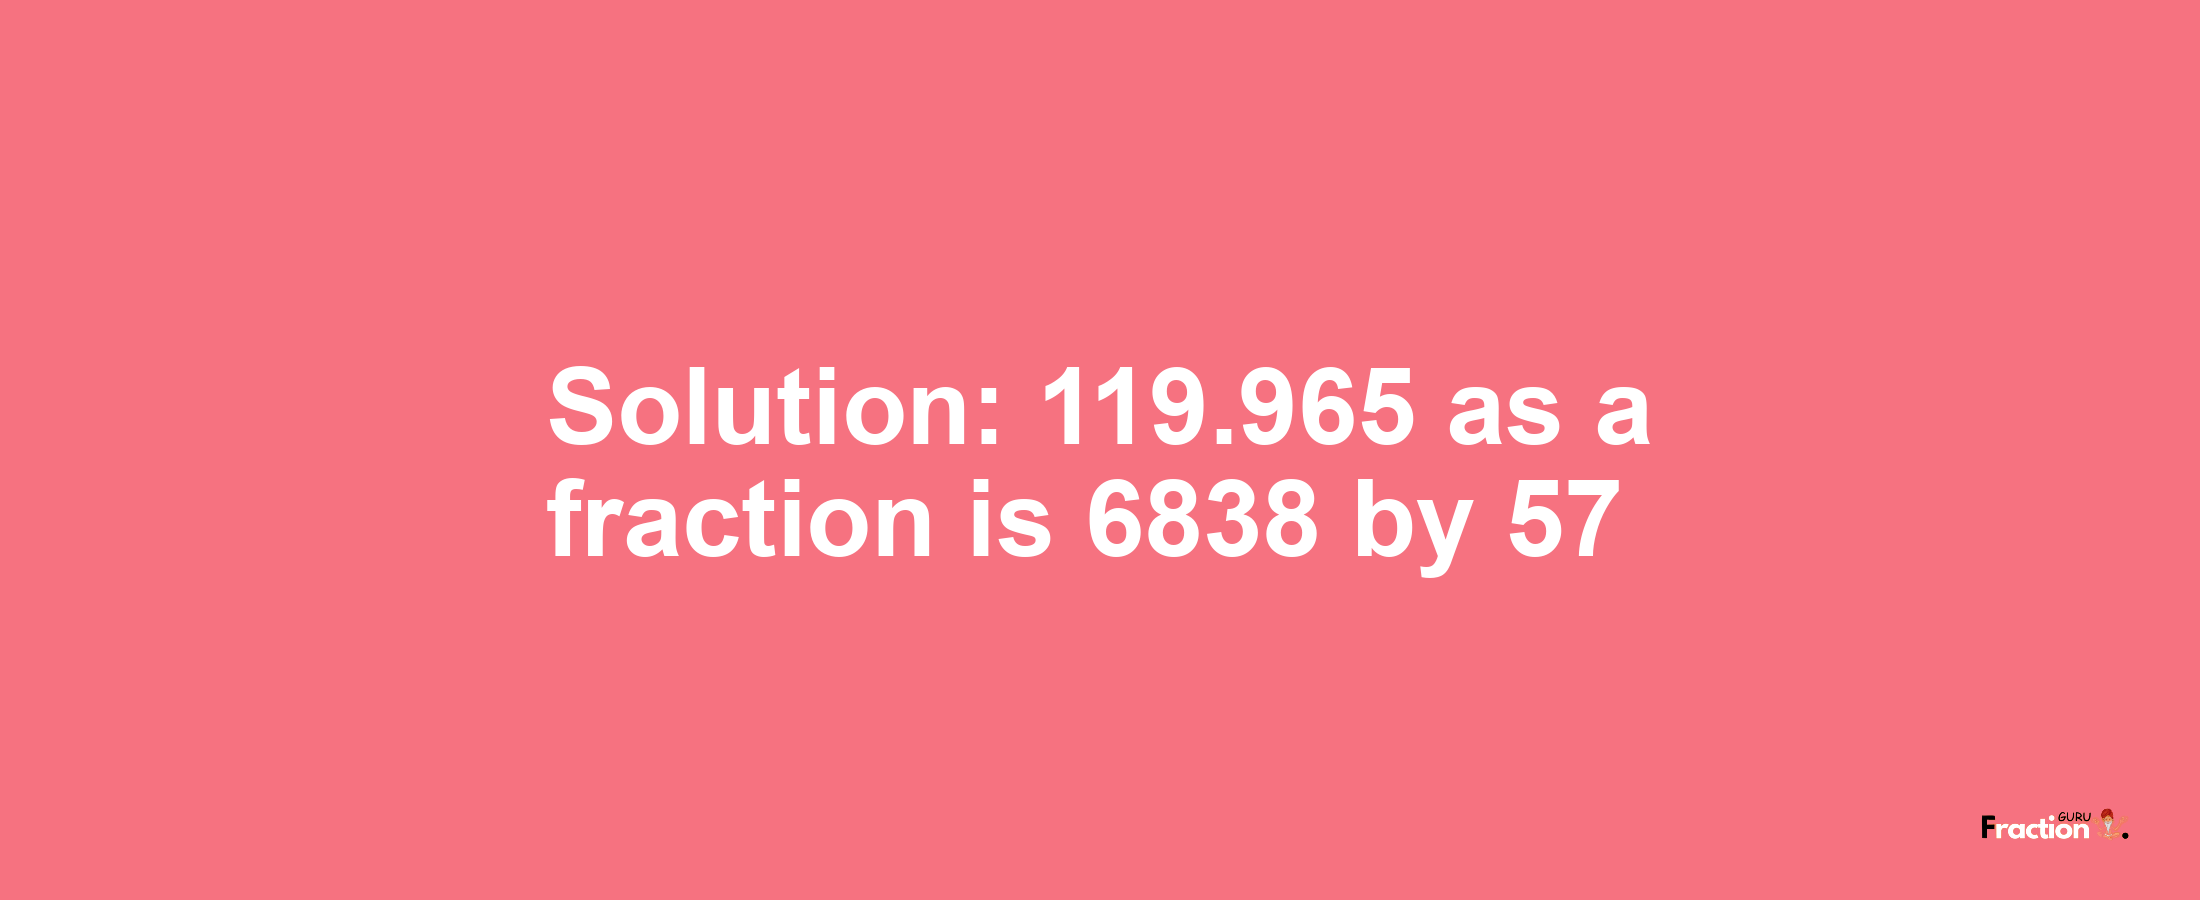 Solution:119.965 as a fraction is 6838/57